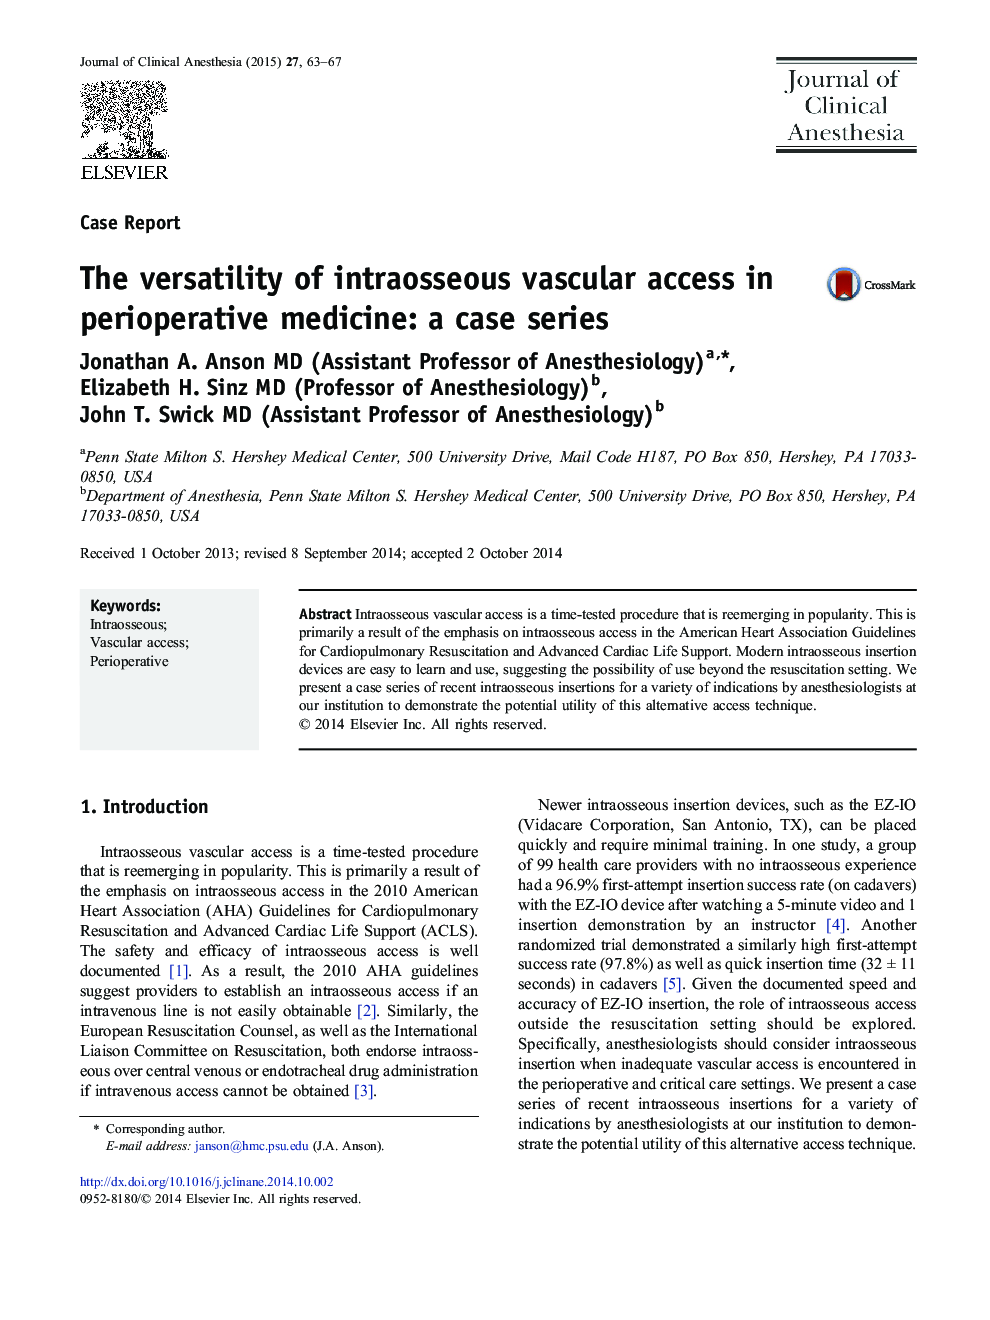 The versatility of intraosseous vascular access in perioperative medicine: a case series